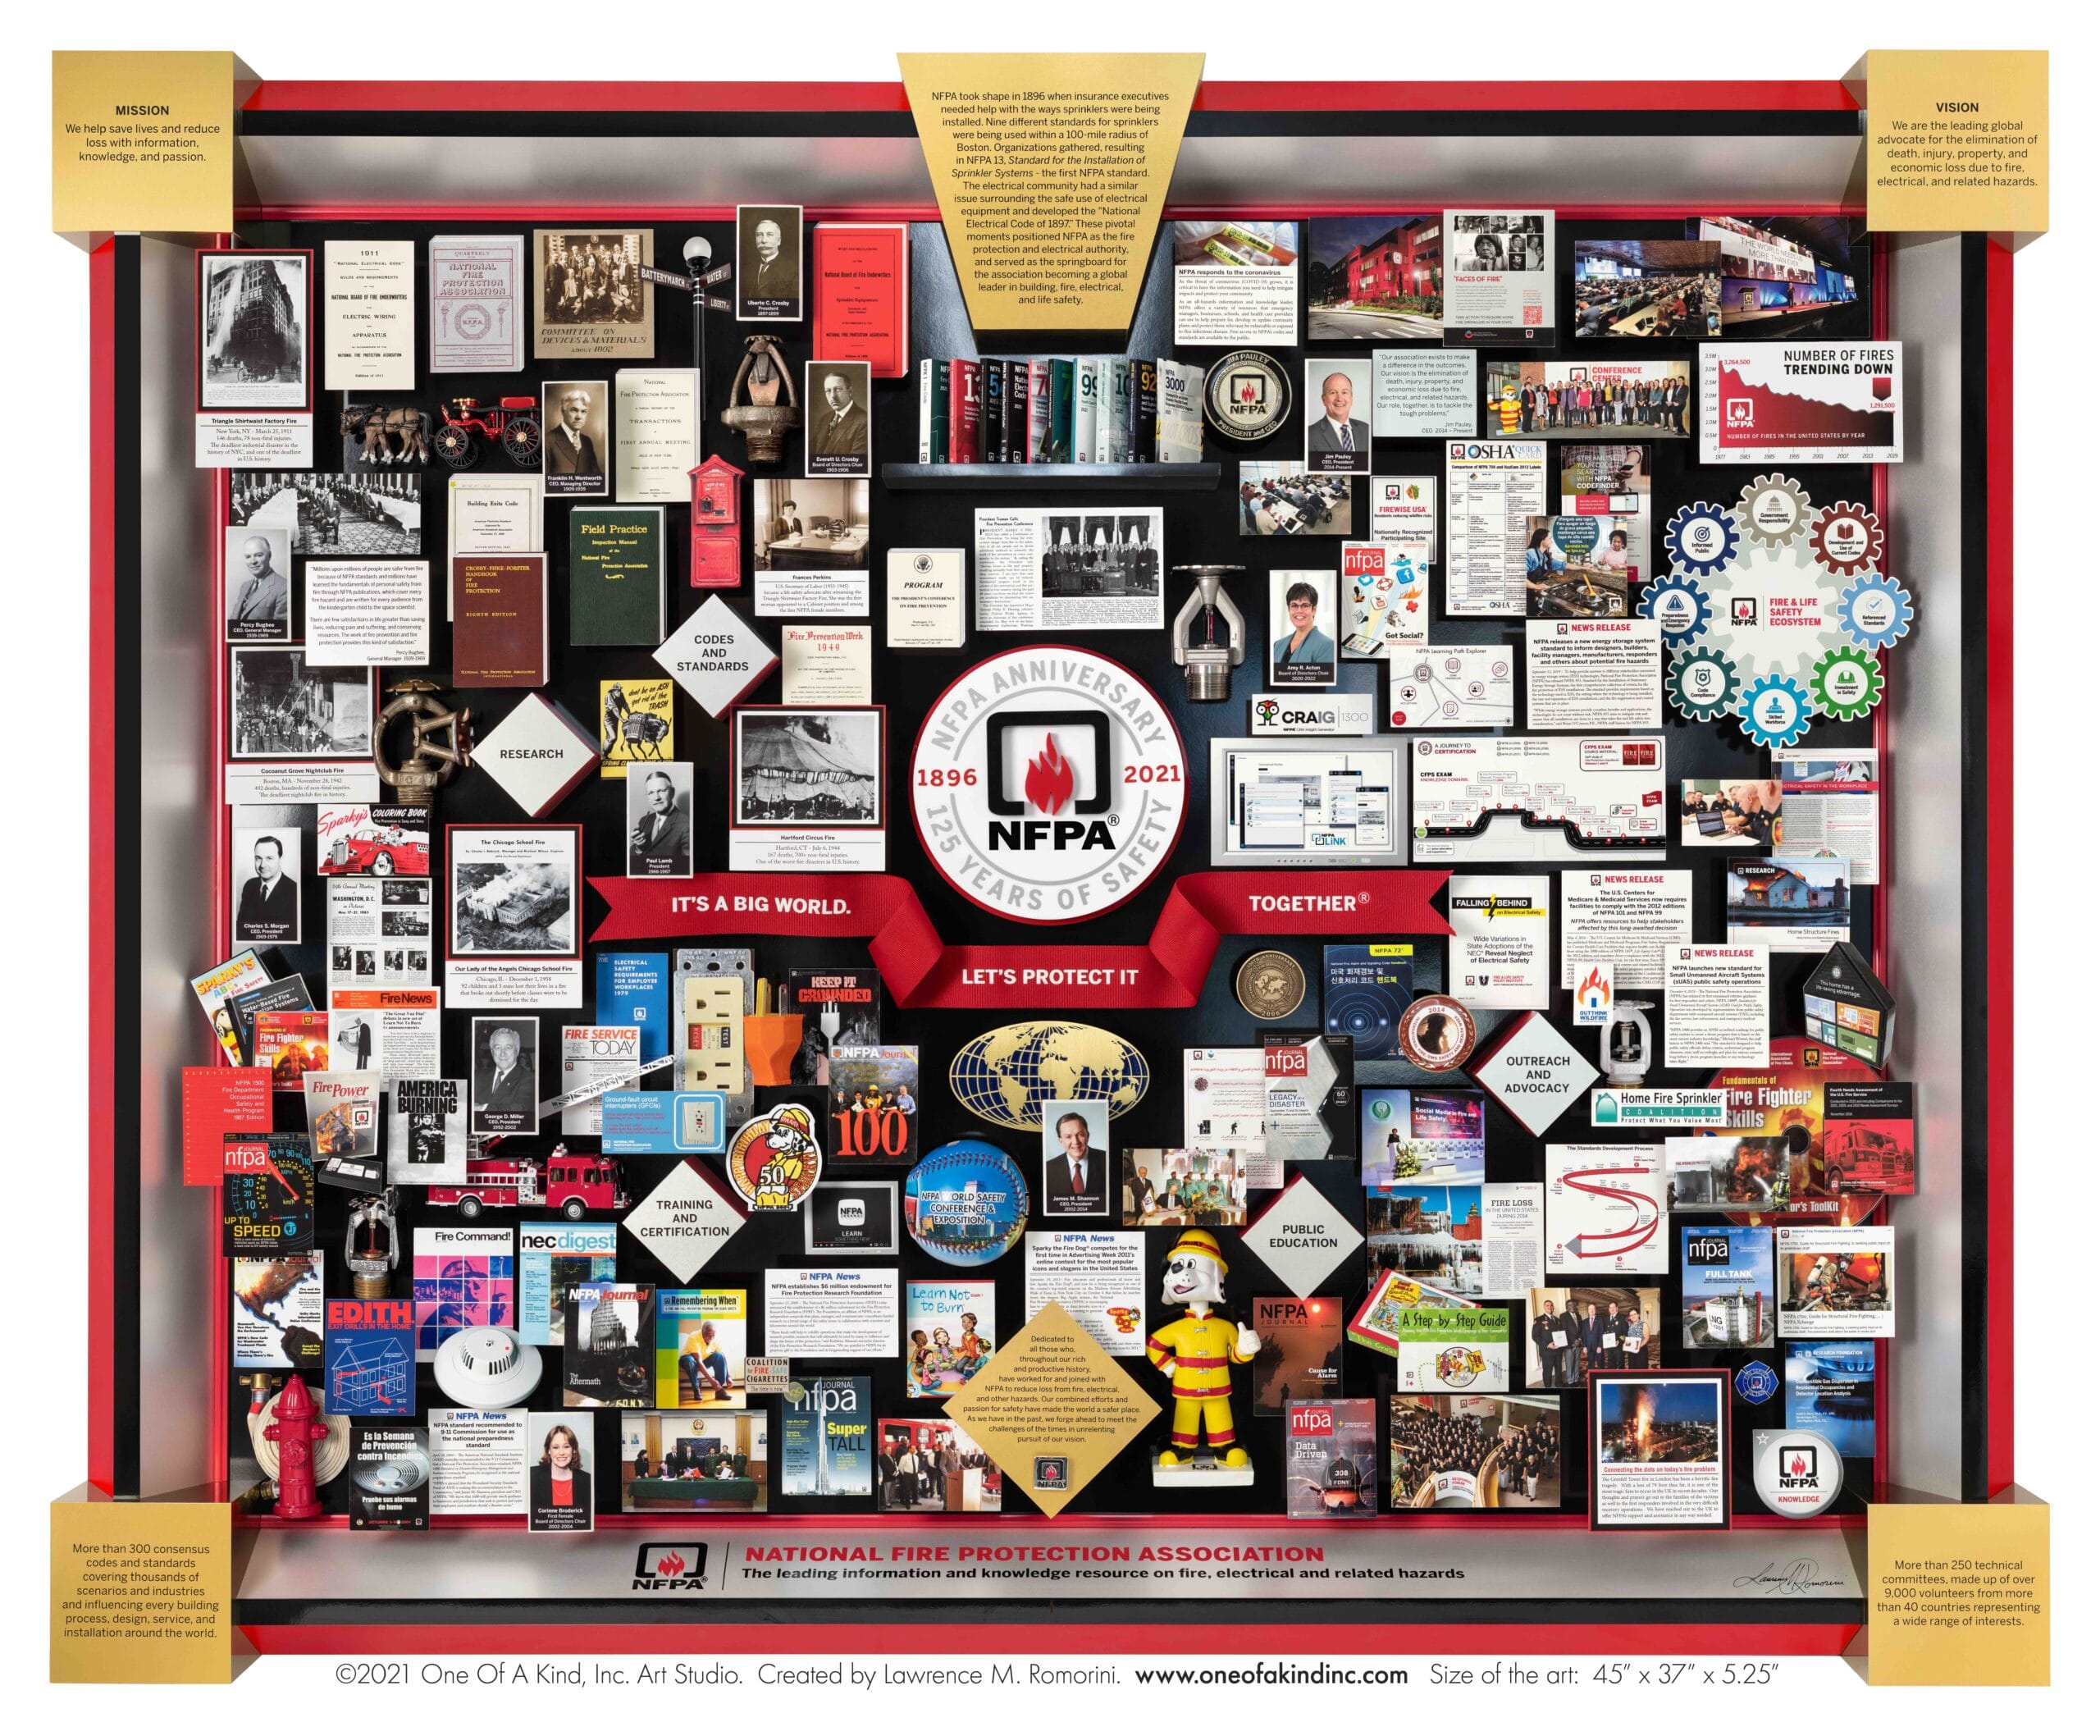 National Fire Protection Association 125th 3-dimensional anniversary art. Includes many 3D items including sparky bobblehead, firetruck, baseball, fire hydrant.